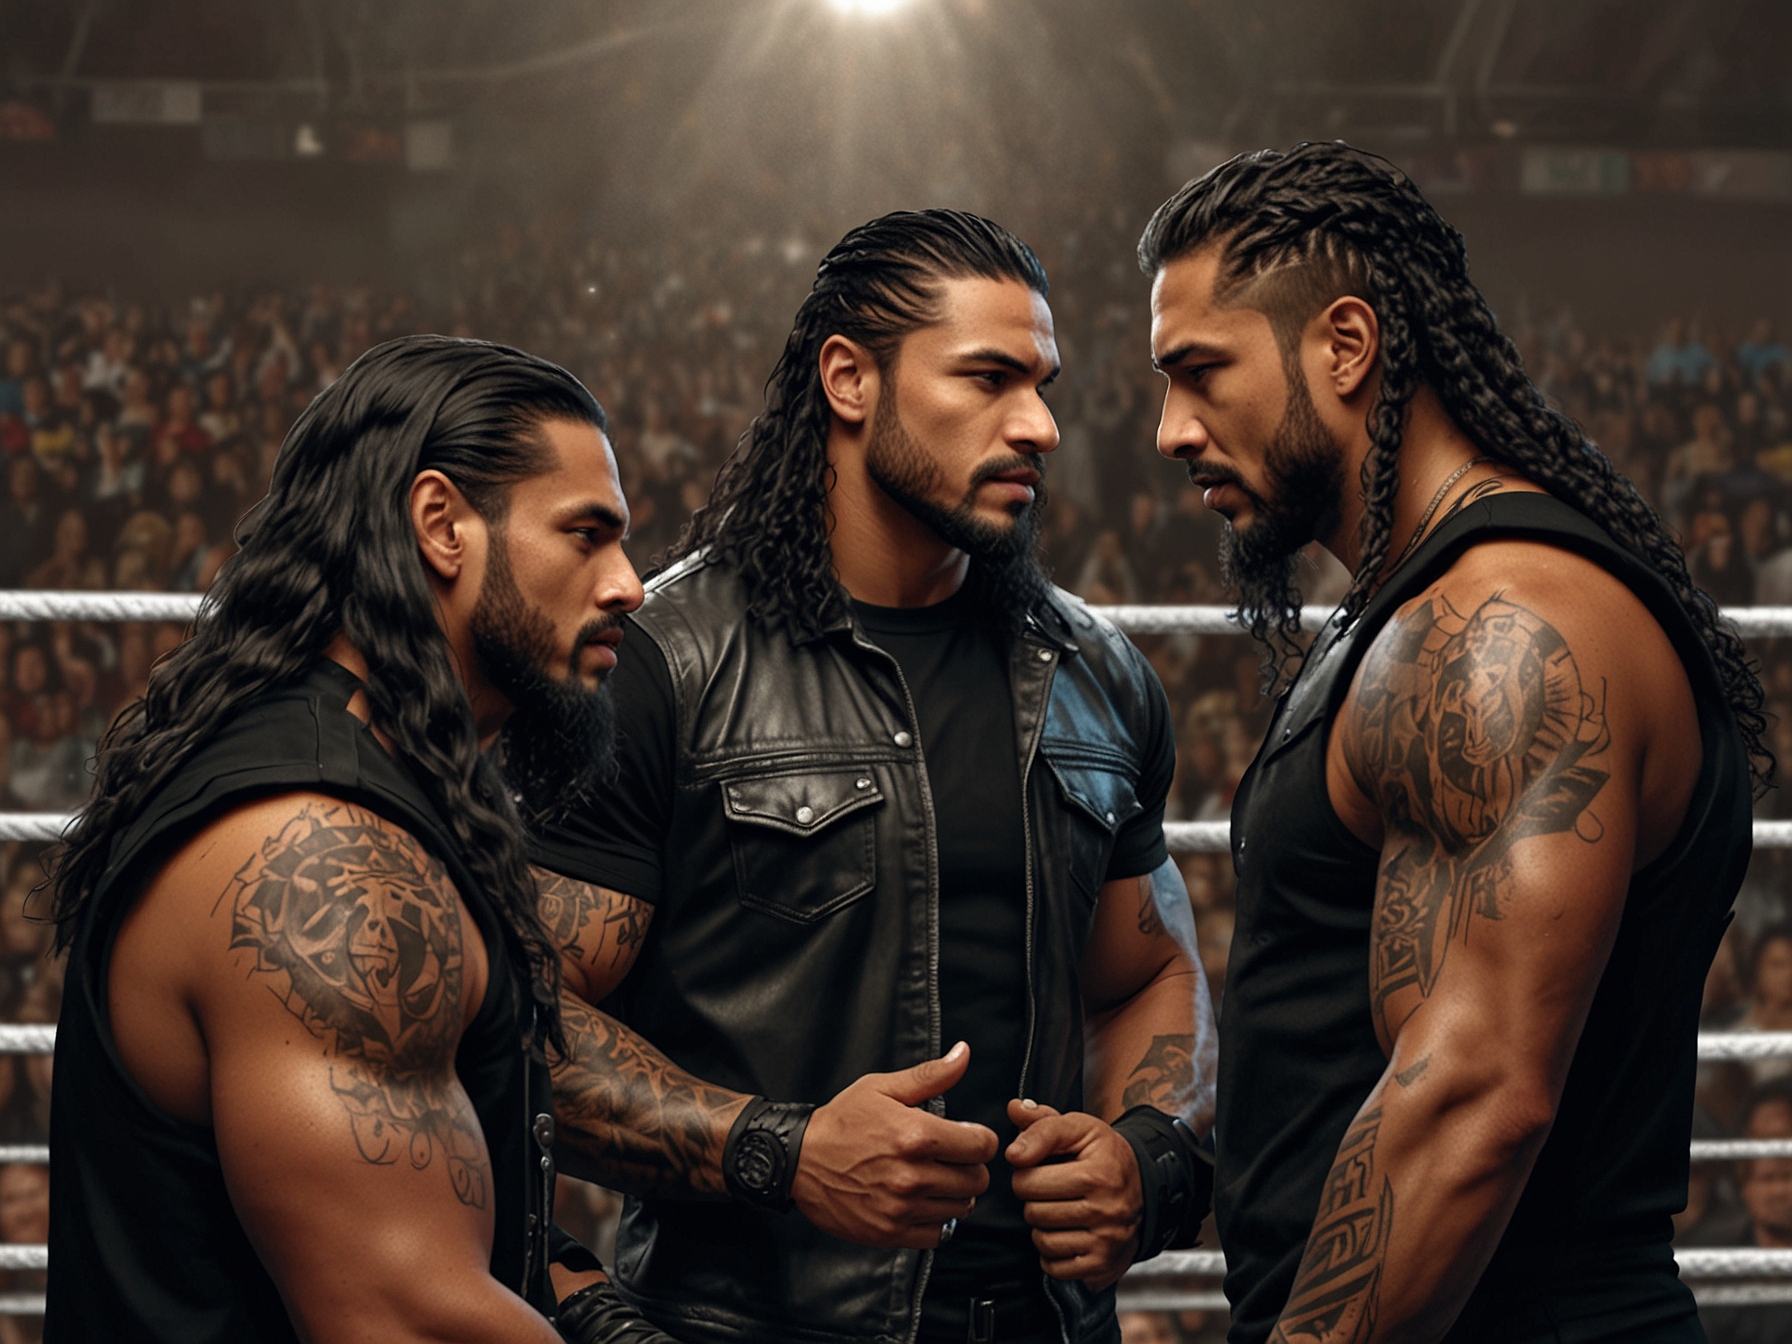 Solo Sikoa interacting with his Bloodline faction members, including Roman Reigns and the Usos, highlighting the mentorship and guidance pivotal in his journey to WWE main event status.